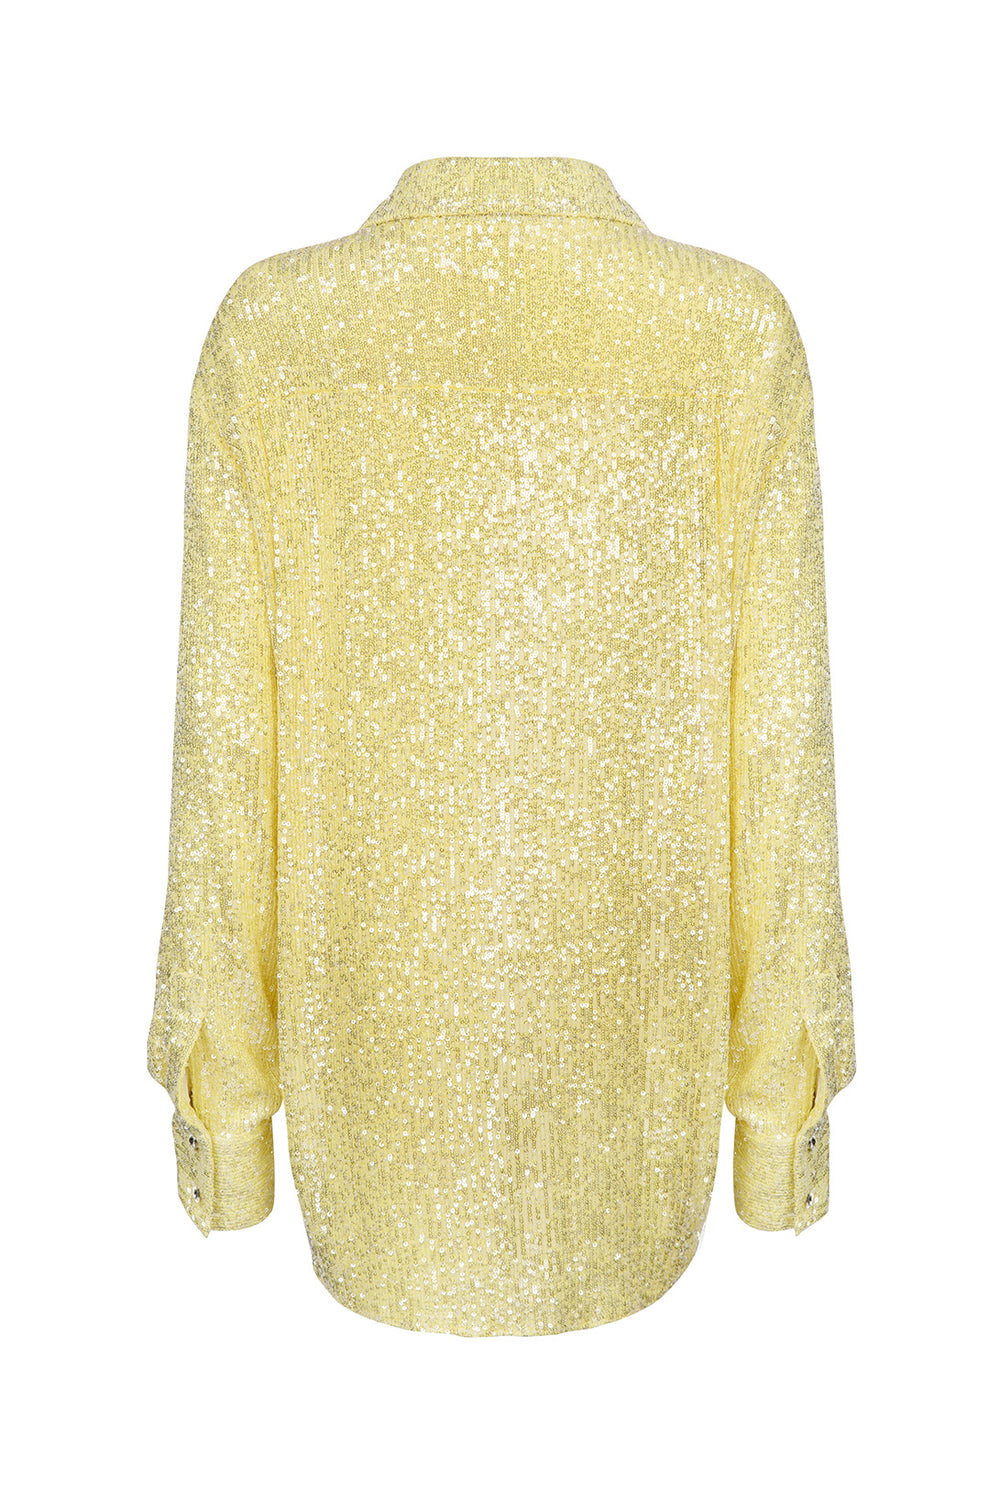 Load image into Gallery viewer, Yellow sequin shirt